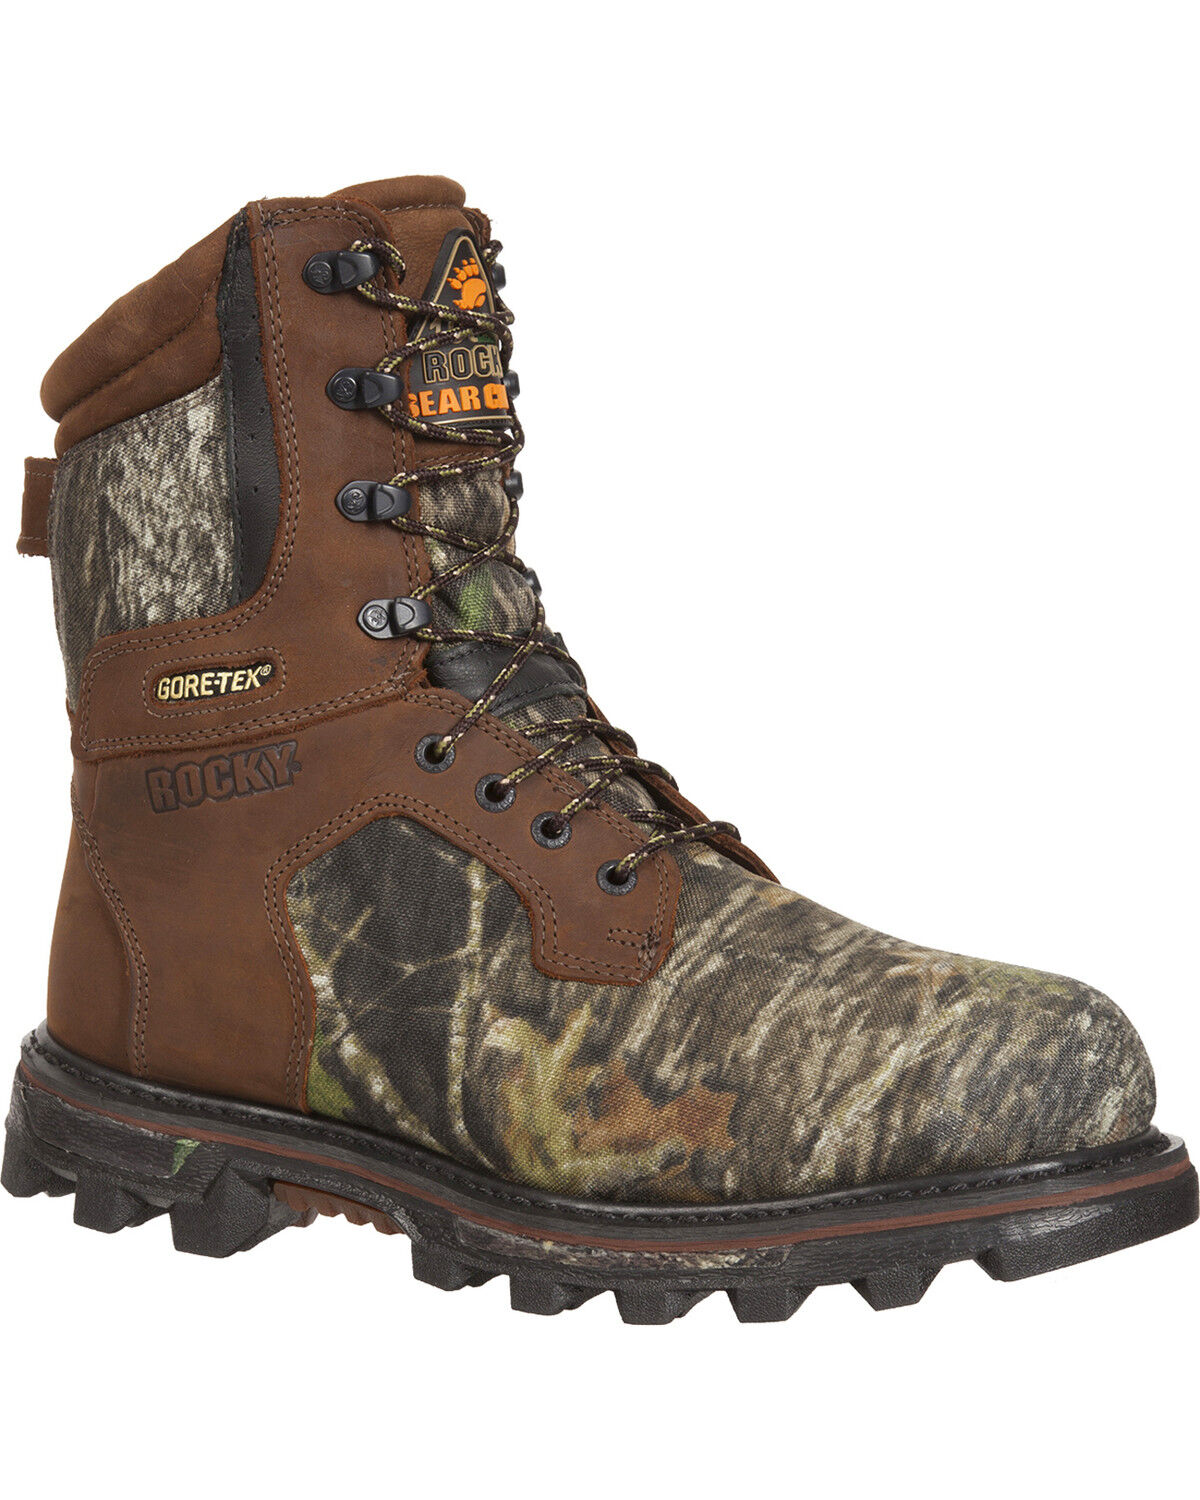 Men's Hunting Boots - Boot Barn